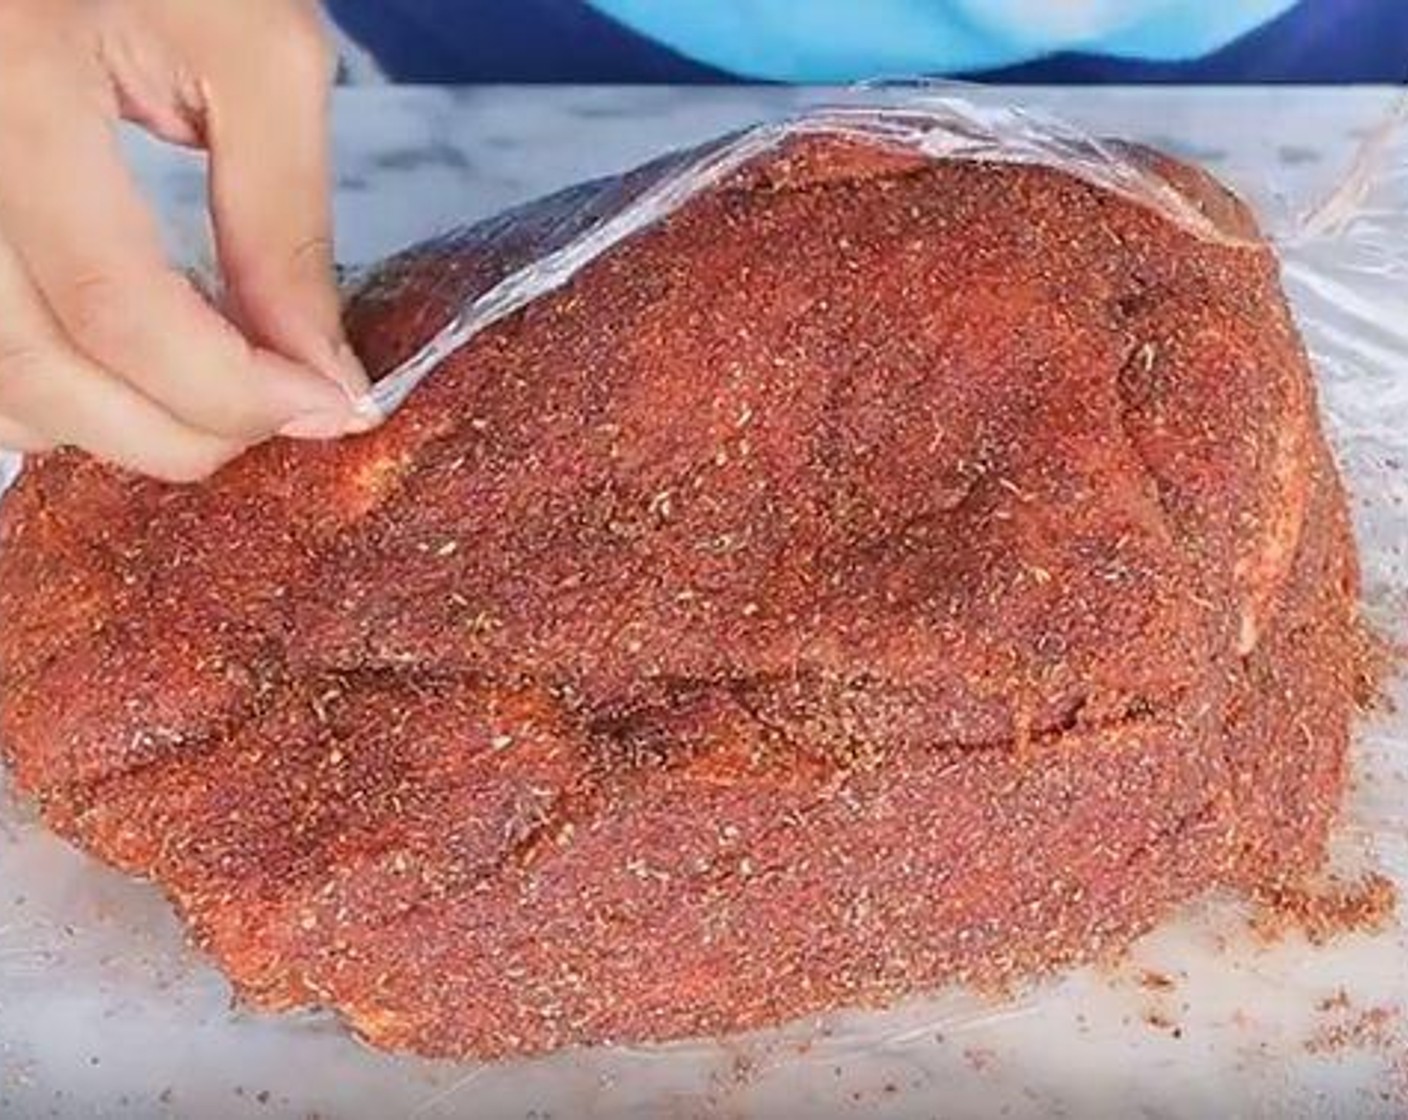 step 2 Rub the mixture all over the Pork Shoulder (7 lb). Wrap the pork in plastic wrap and refrigerate for several hours or overnight.